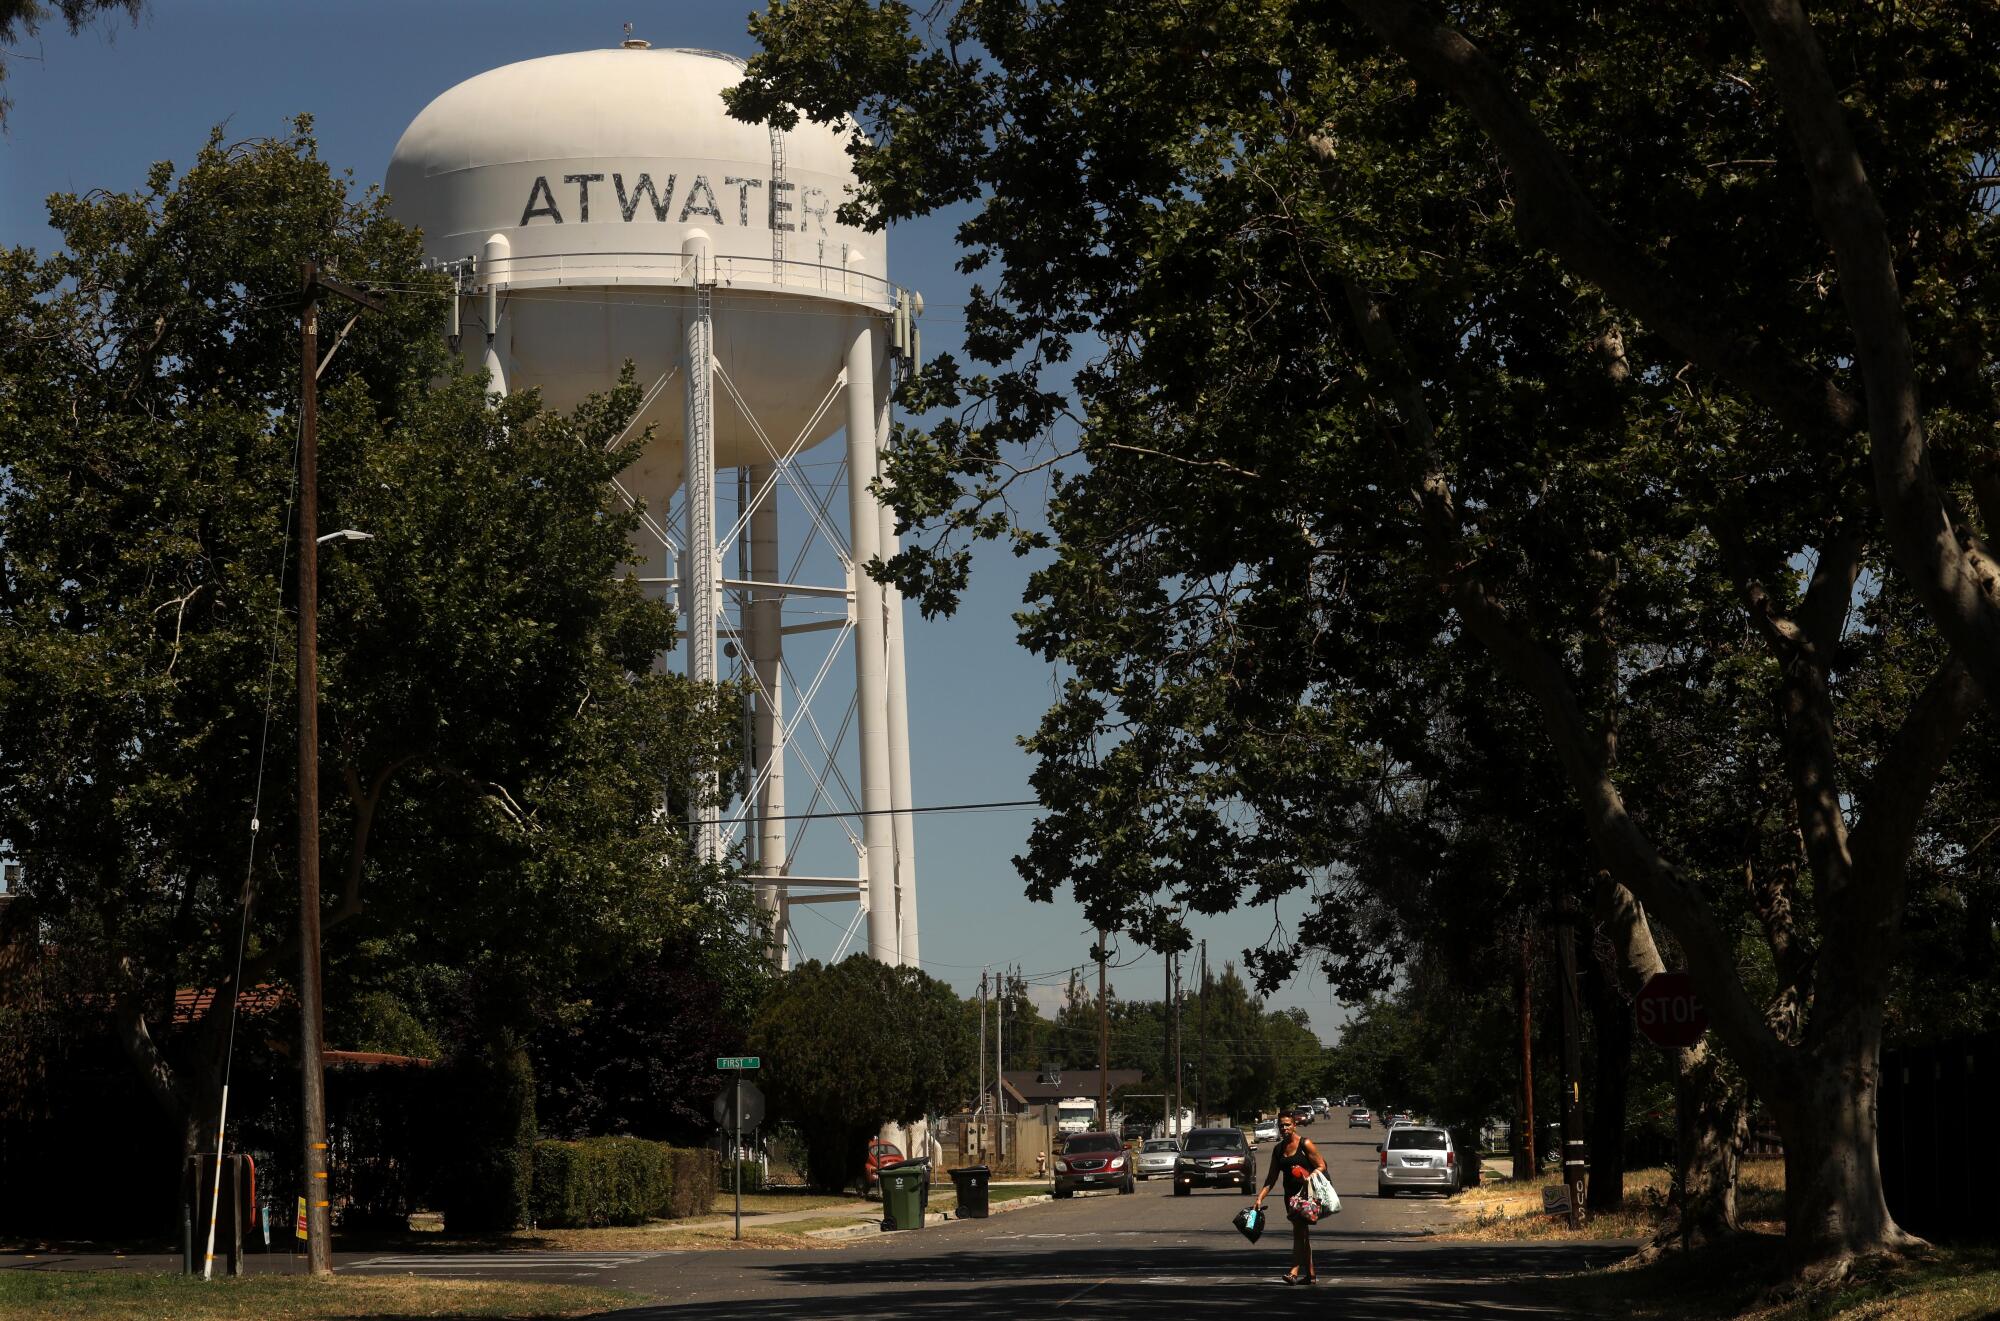  The Atwater water tower anchors the historic downtown of Atwater